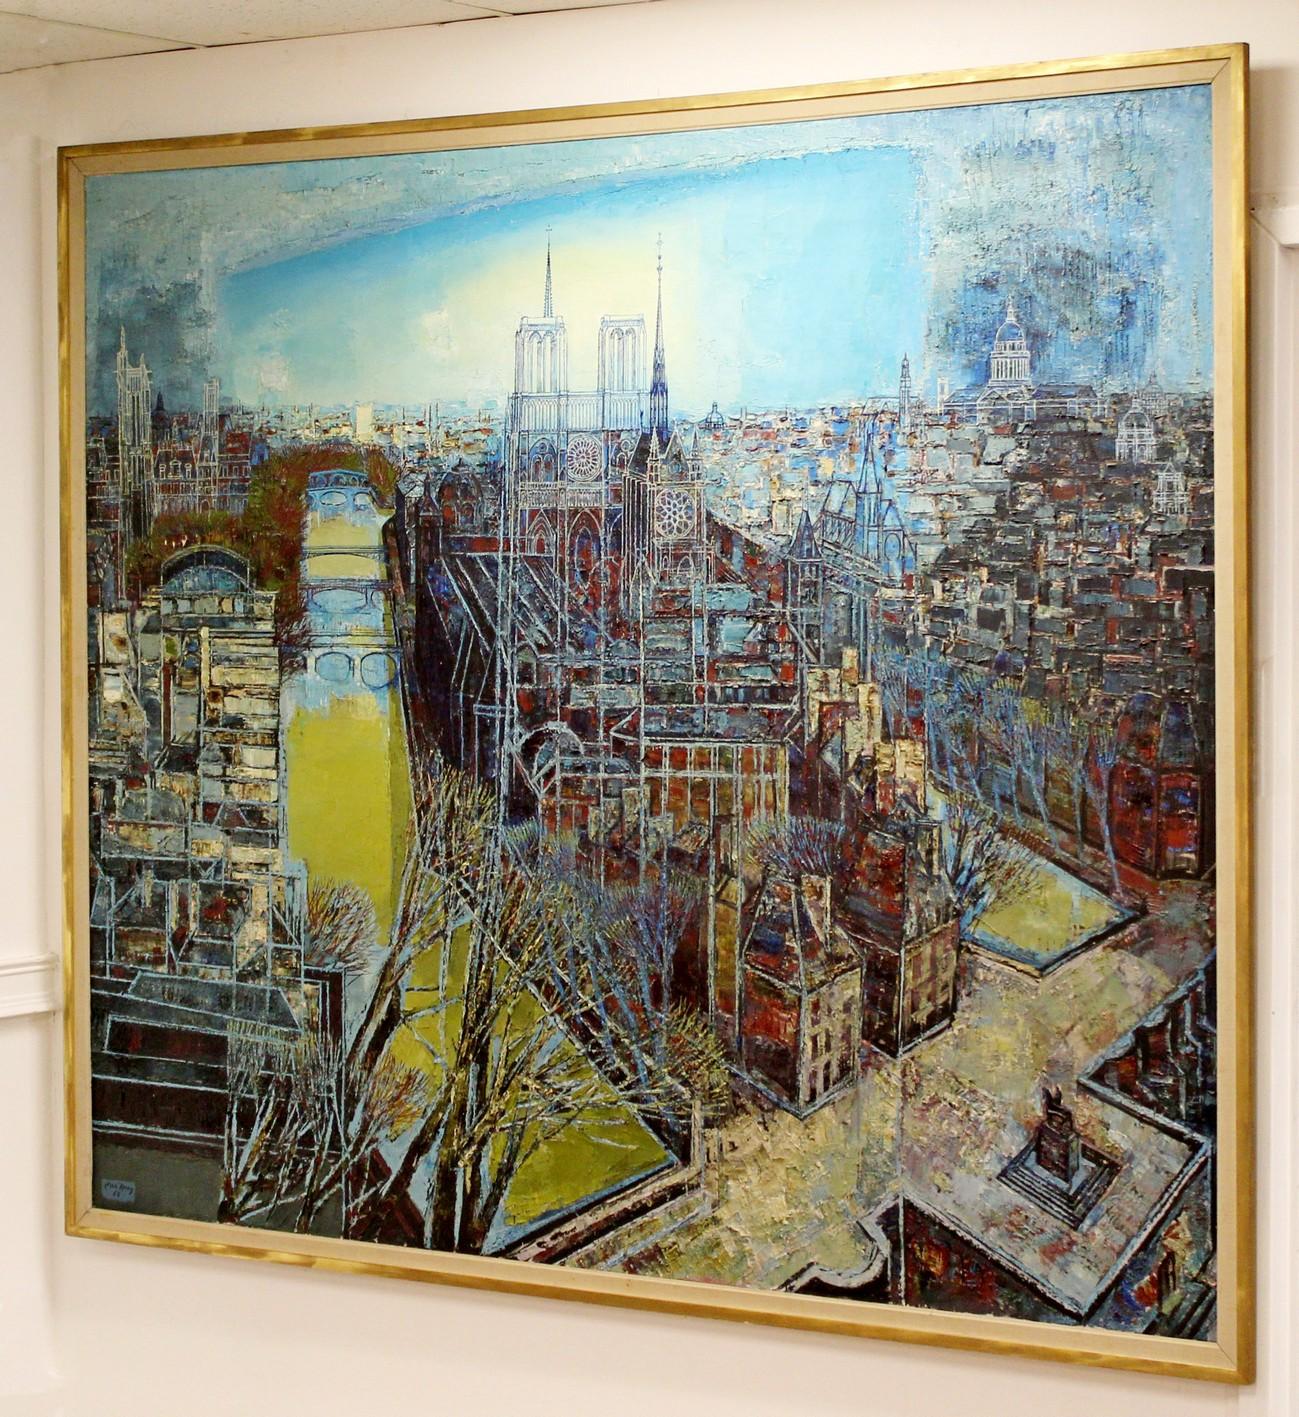 For your consideration is an incredibly large and monumental, framed oil sgraffito painting of Paris, signed by Edouard Mac Avoy, dated 1963. Mac-Avoy sold his first painting to the government when he was only 19 years old. It was exhibited at the